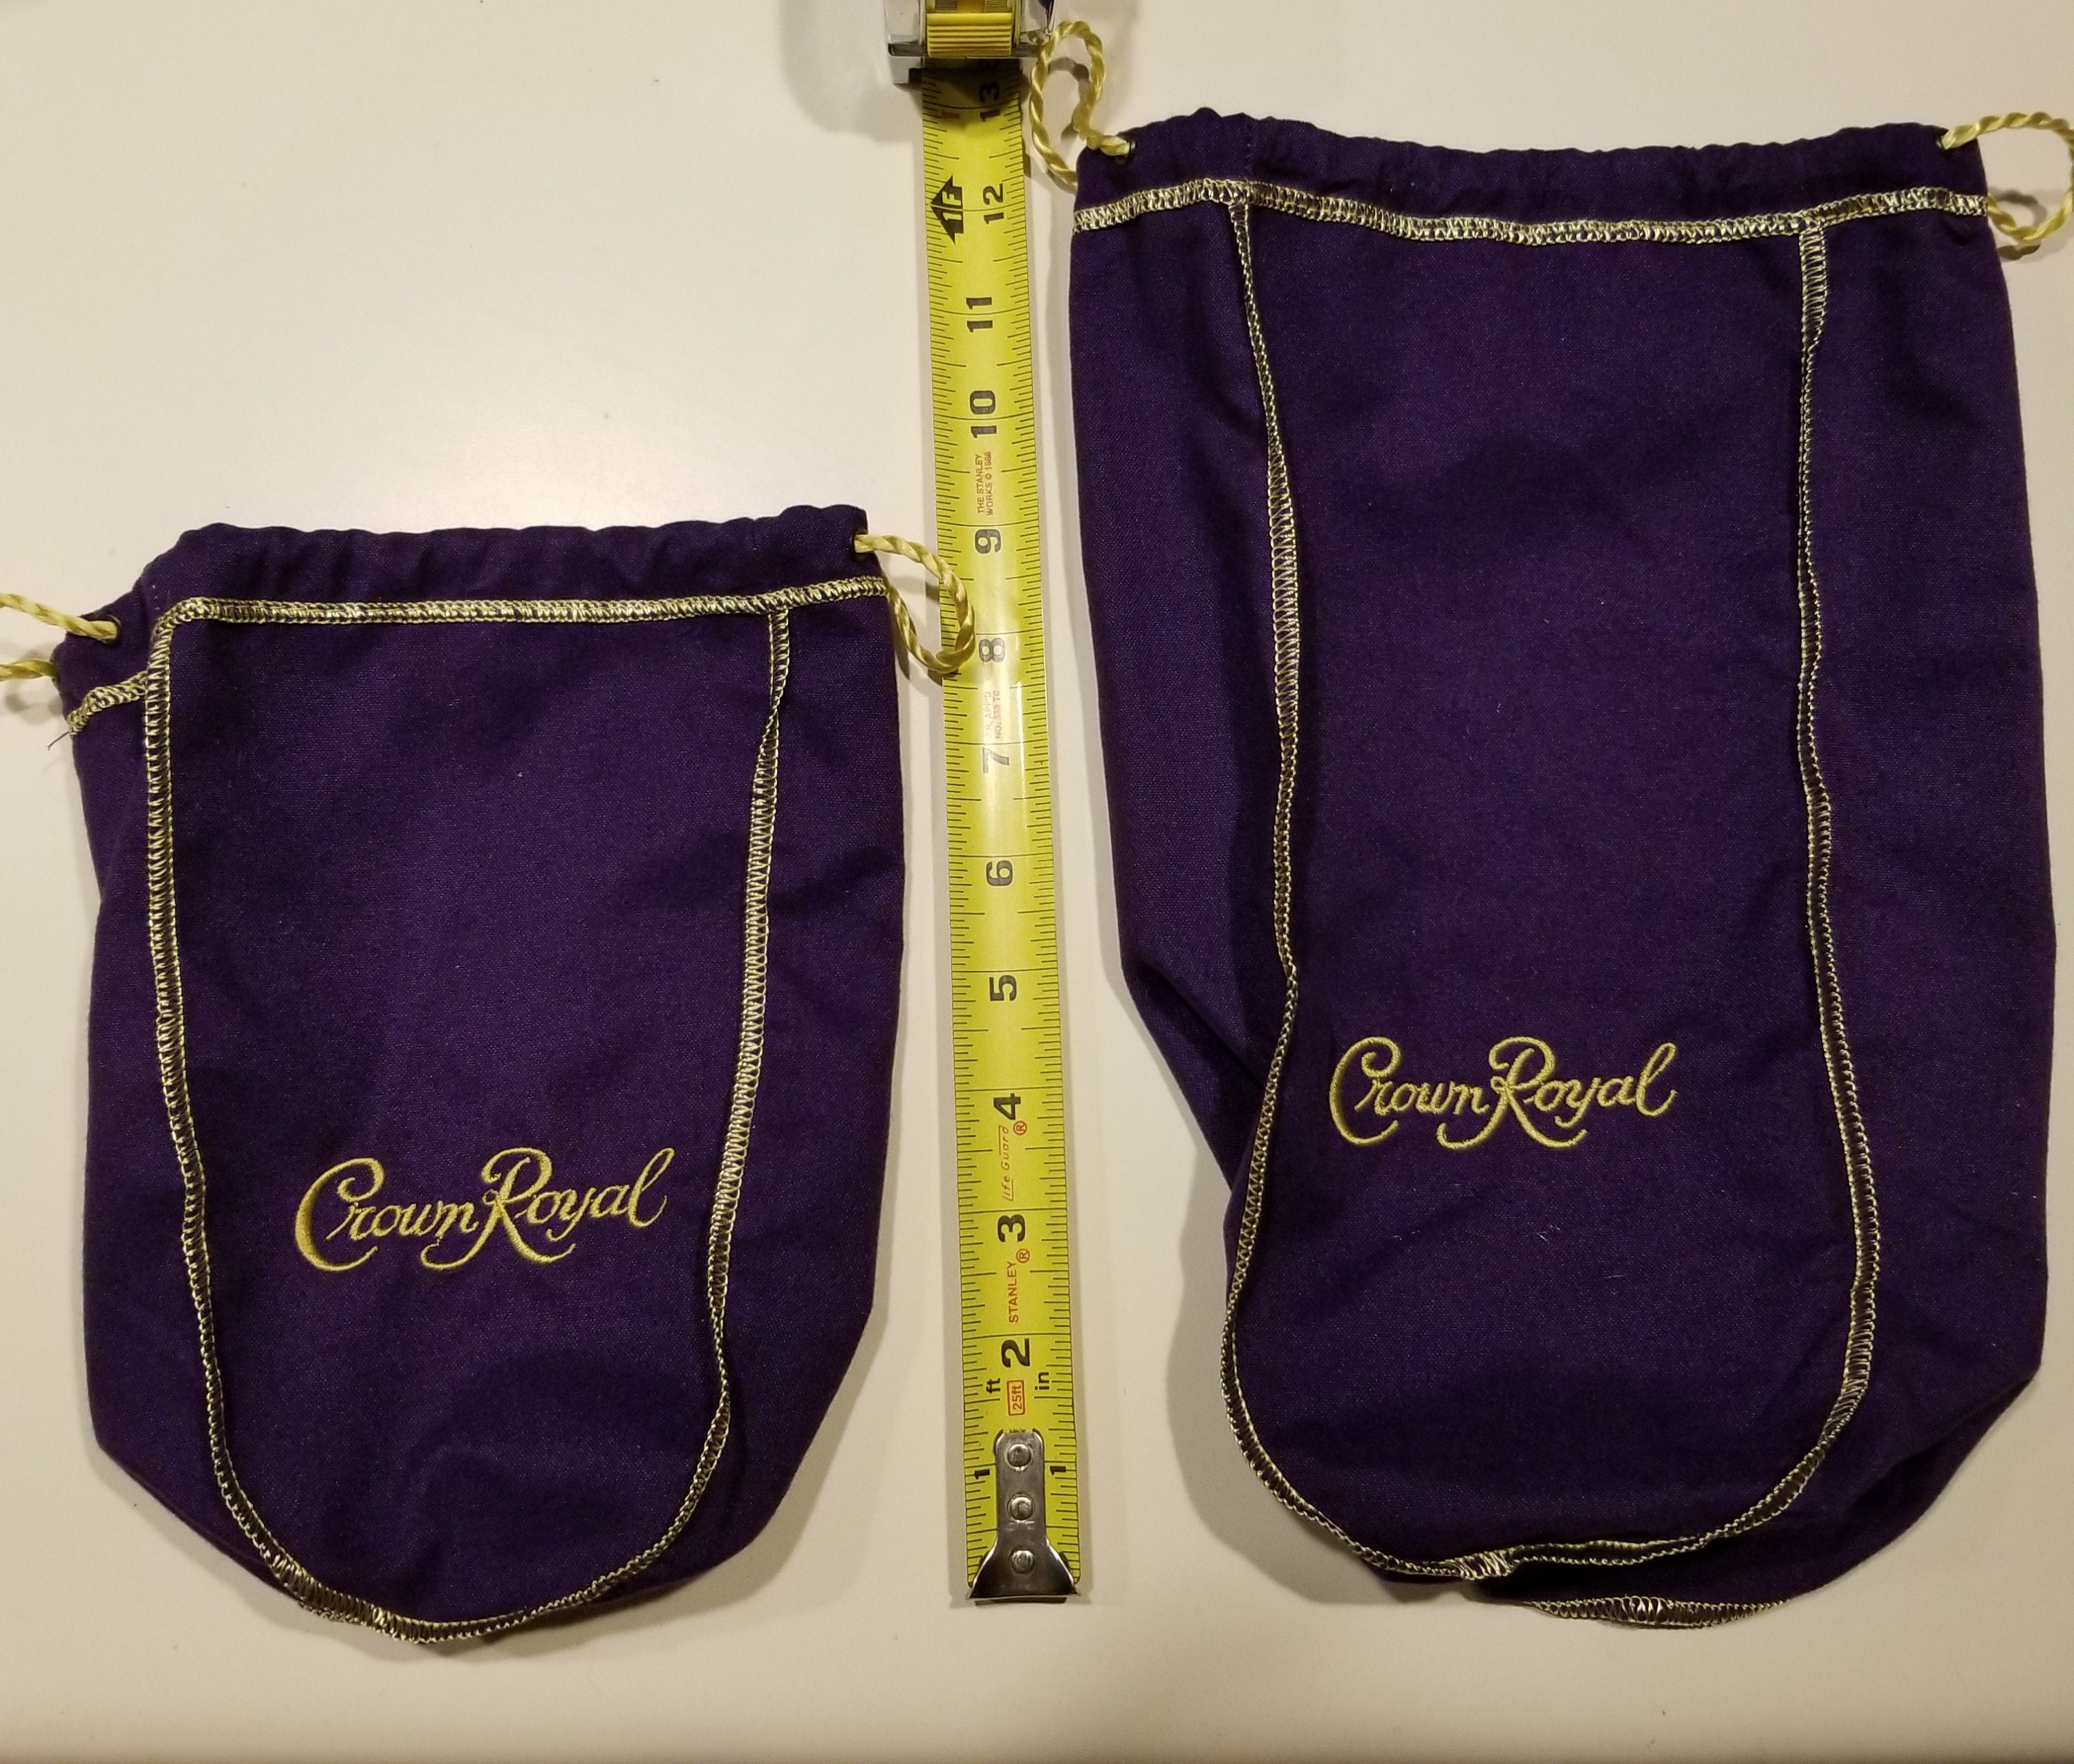 Amazon.com: Crown Royal Black Bag w/Gold Drawstring Storage Gift Bag  Shiftboot Carrying Dice or Games Fabric for Sewing : Arts, Crafts & Sewing